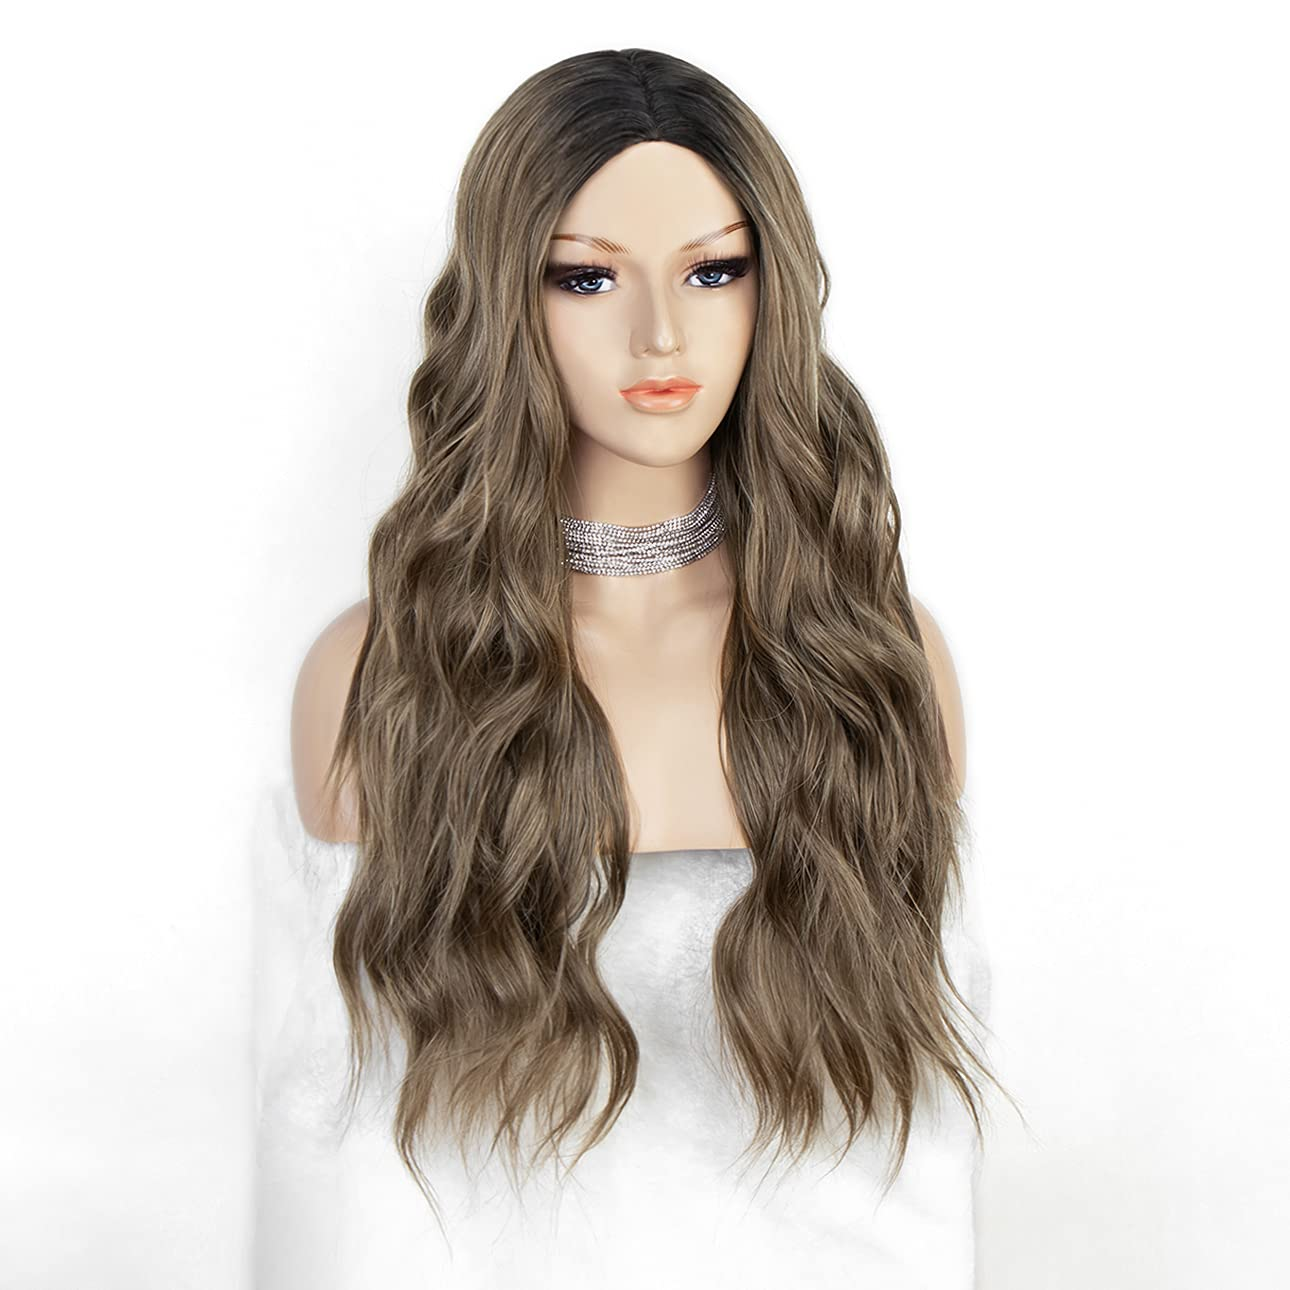 K'Ryssma Long Brown Wig Ombre Wavy Synthteic Wig with Dark Roots Natural Looking Brown Ombre Wig for Women 22 Inches